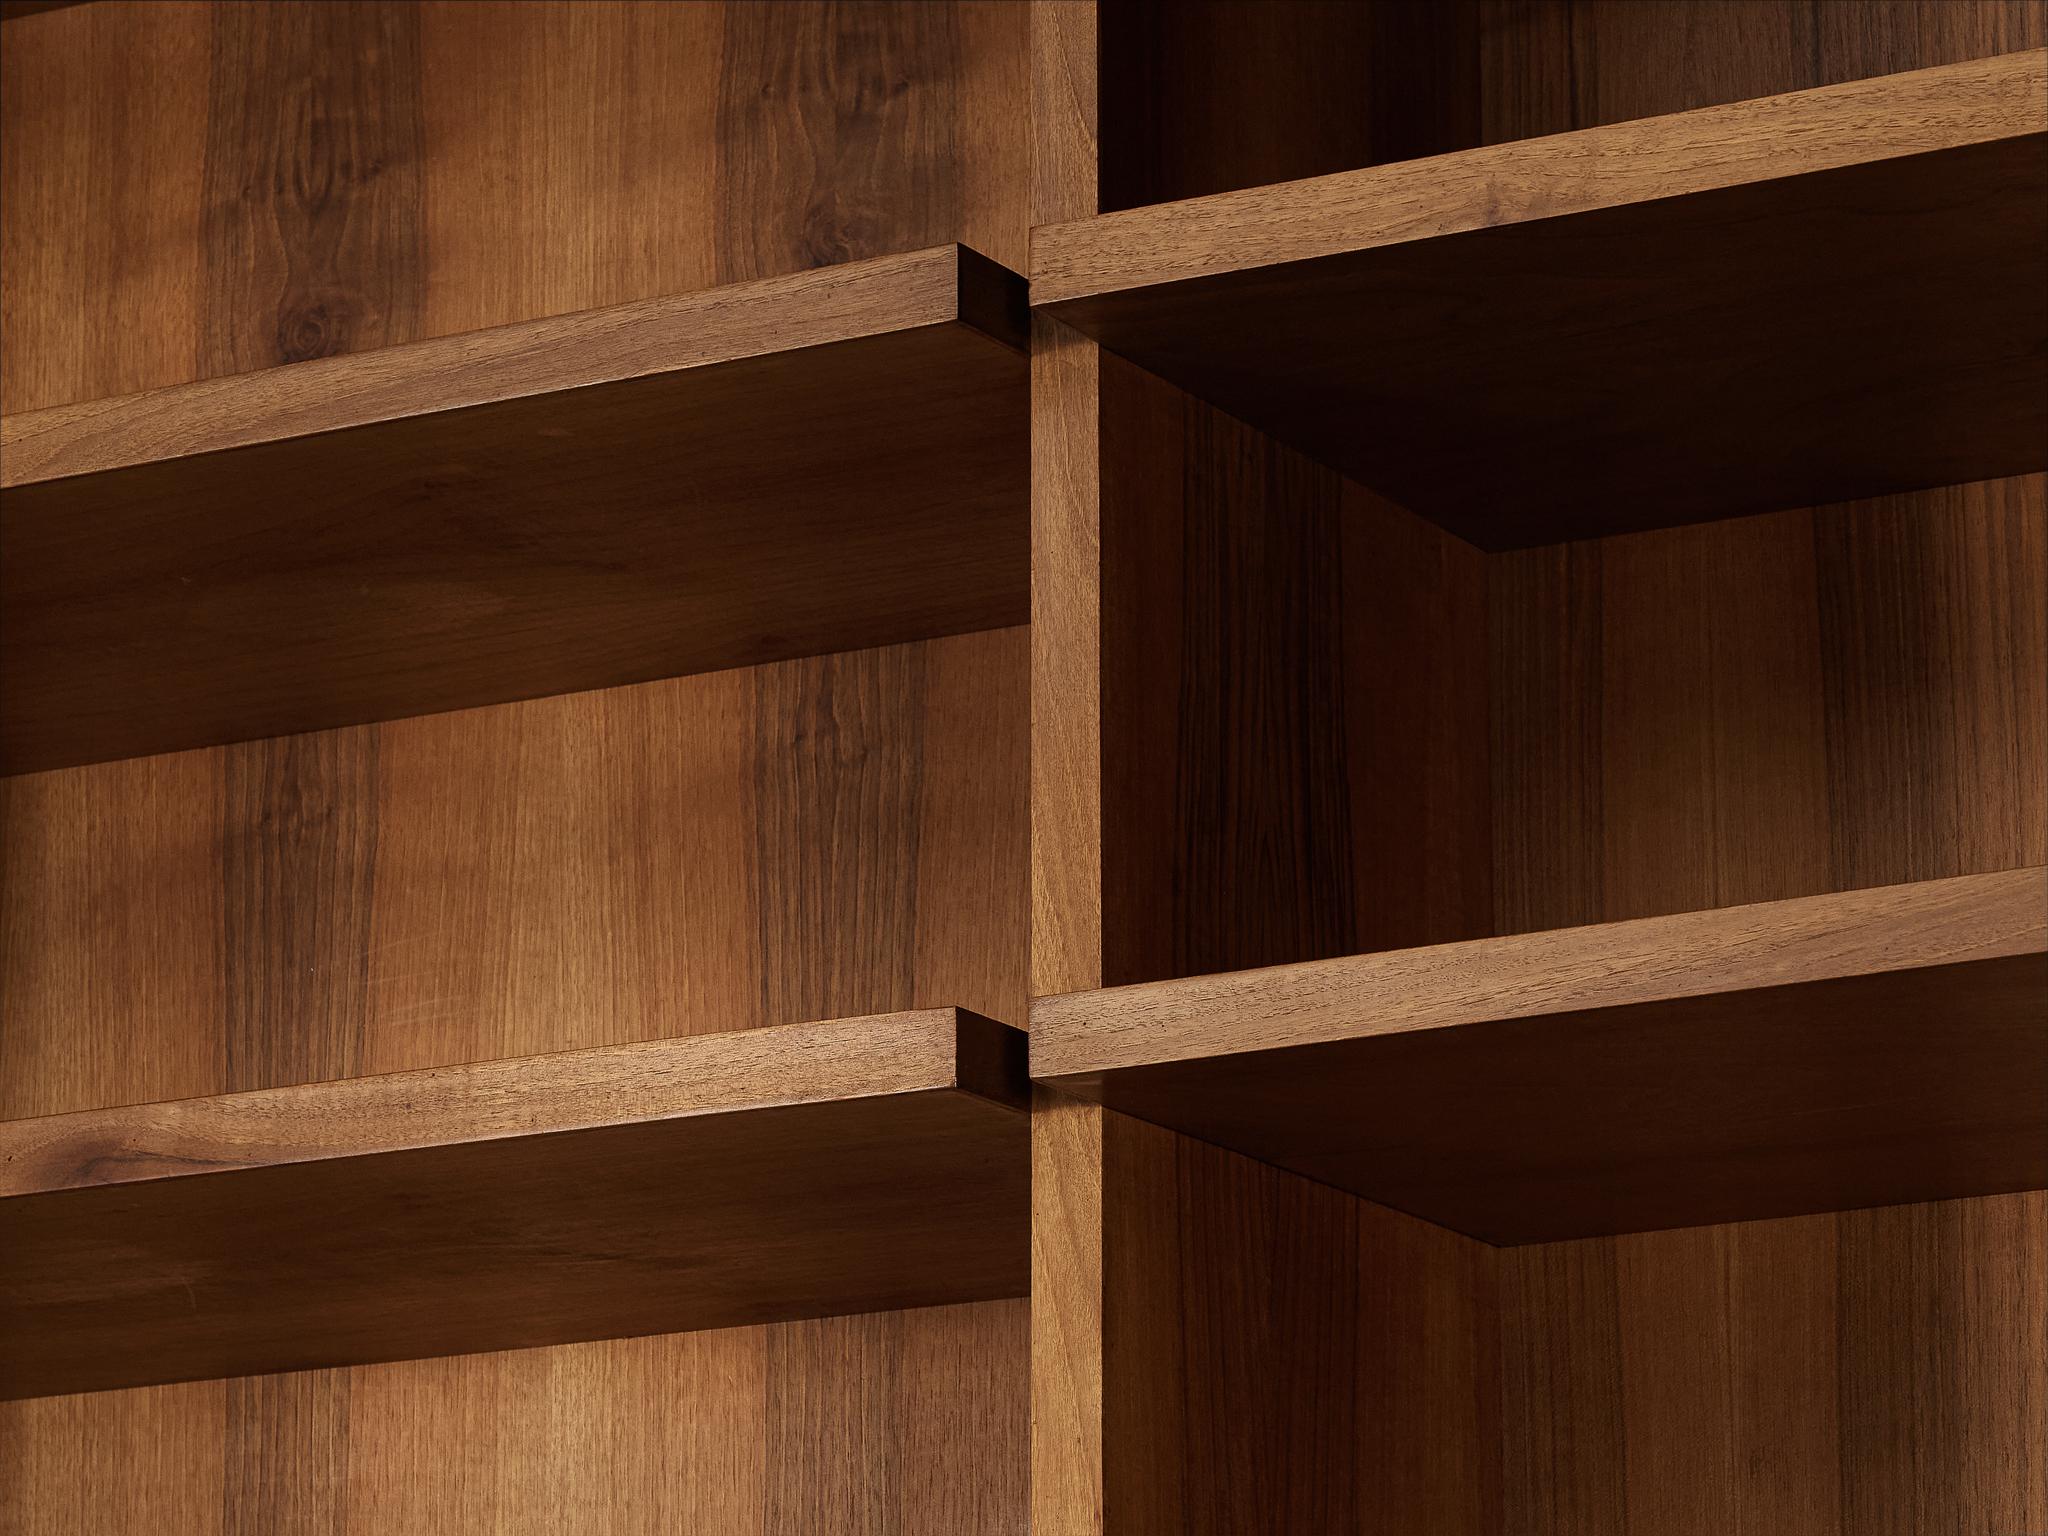 Large Italian Bookcase in Walnut, Cherry, and Grasscloth For Sale 8